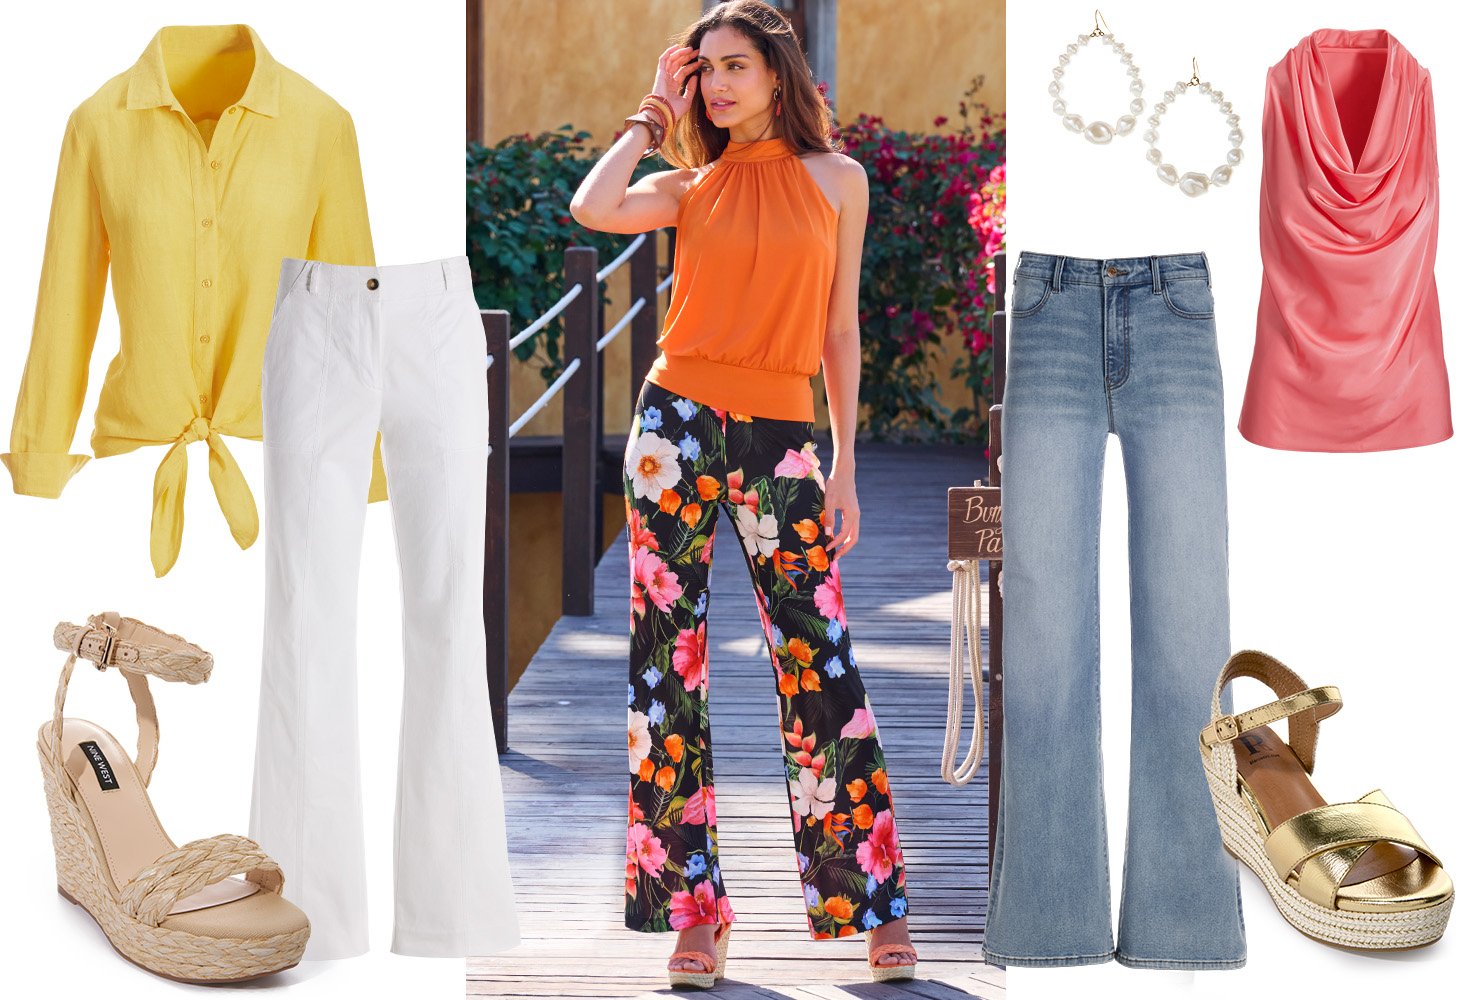 Left panel: yellow tie-front linen button-down long sleeve top, white palazzo jeans, and neutral woven wedges  with ankle straps. Center: Model wearing an orange mock-neck sleeveless blouson top, multicolor floral print palazzo pants, and orange woven wedges. Right panel: Pink cowl-neck sleeveless charmeuse blouse, pearl earrings, palazzo jeans, and gold wedges.